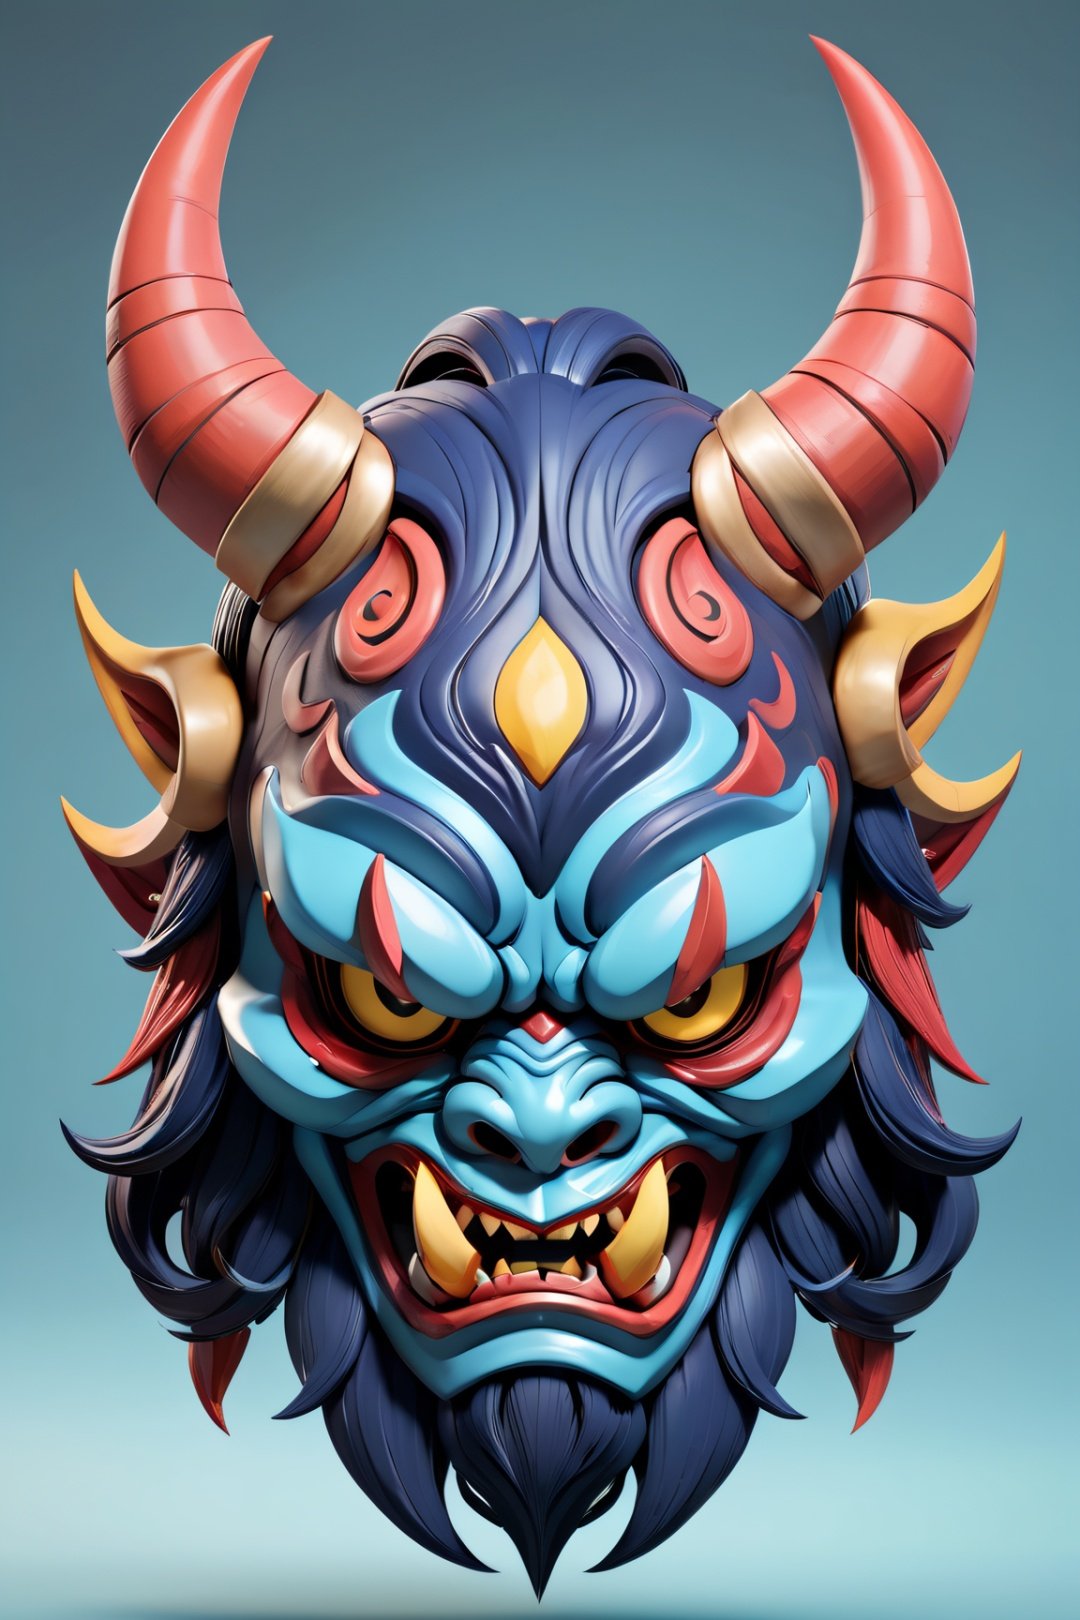 3d toon style, oni mask